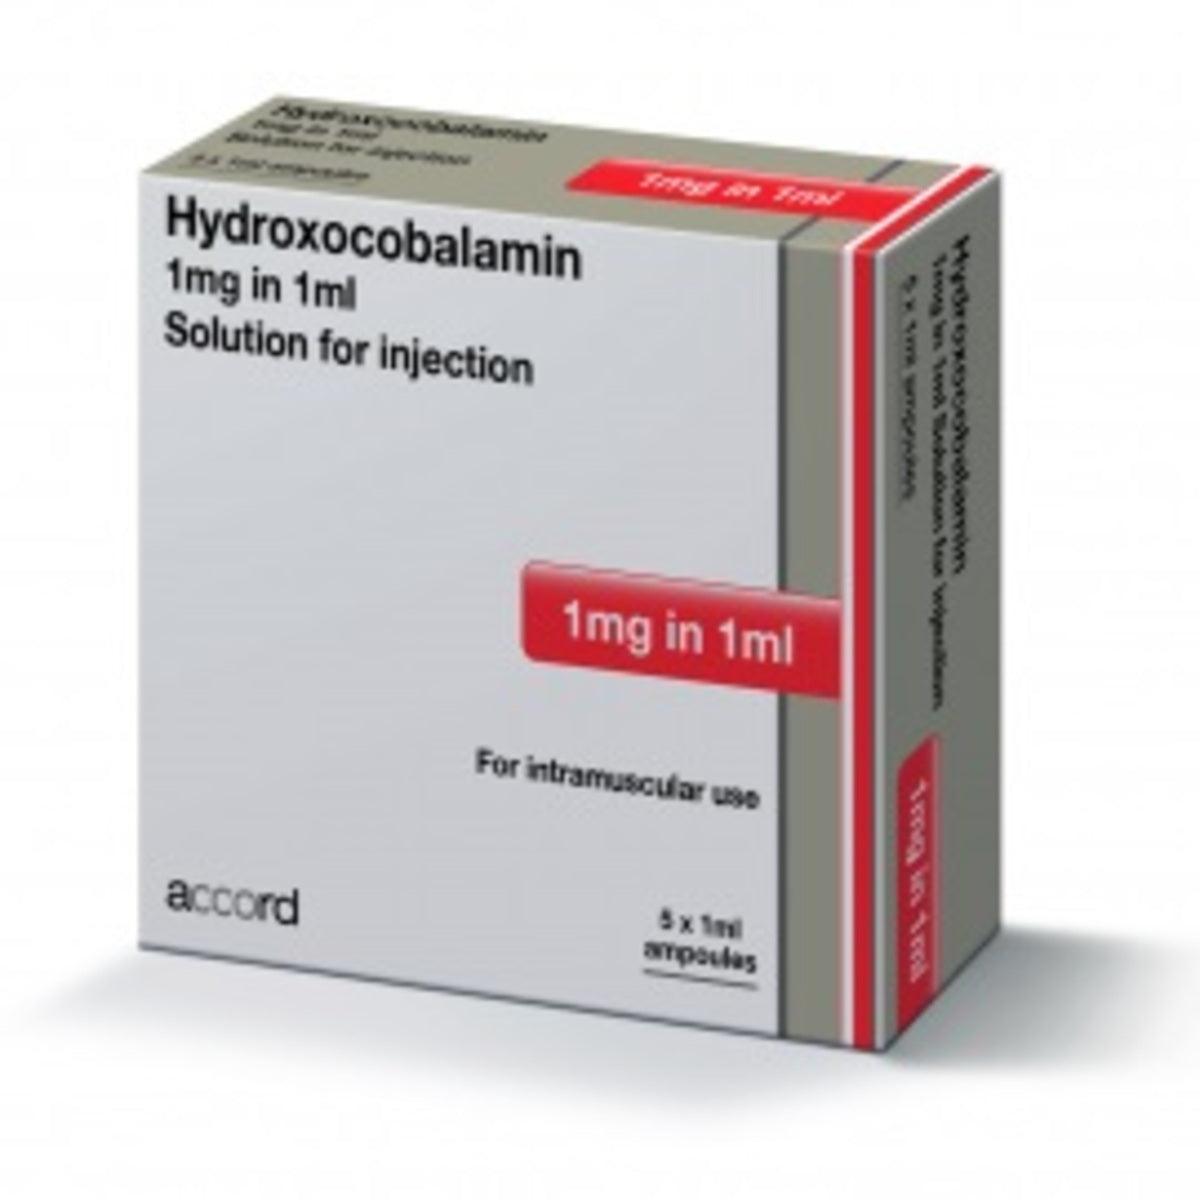 shop Hydroxocobalamin Solution 1mg in 1 ml x 1 Ampoule from HealthPlus online pharmacy in Nigeria